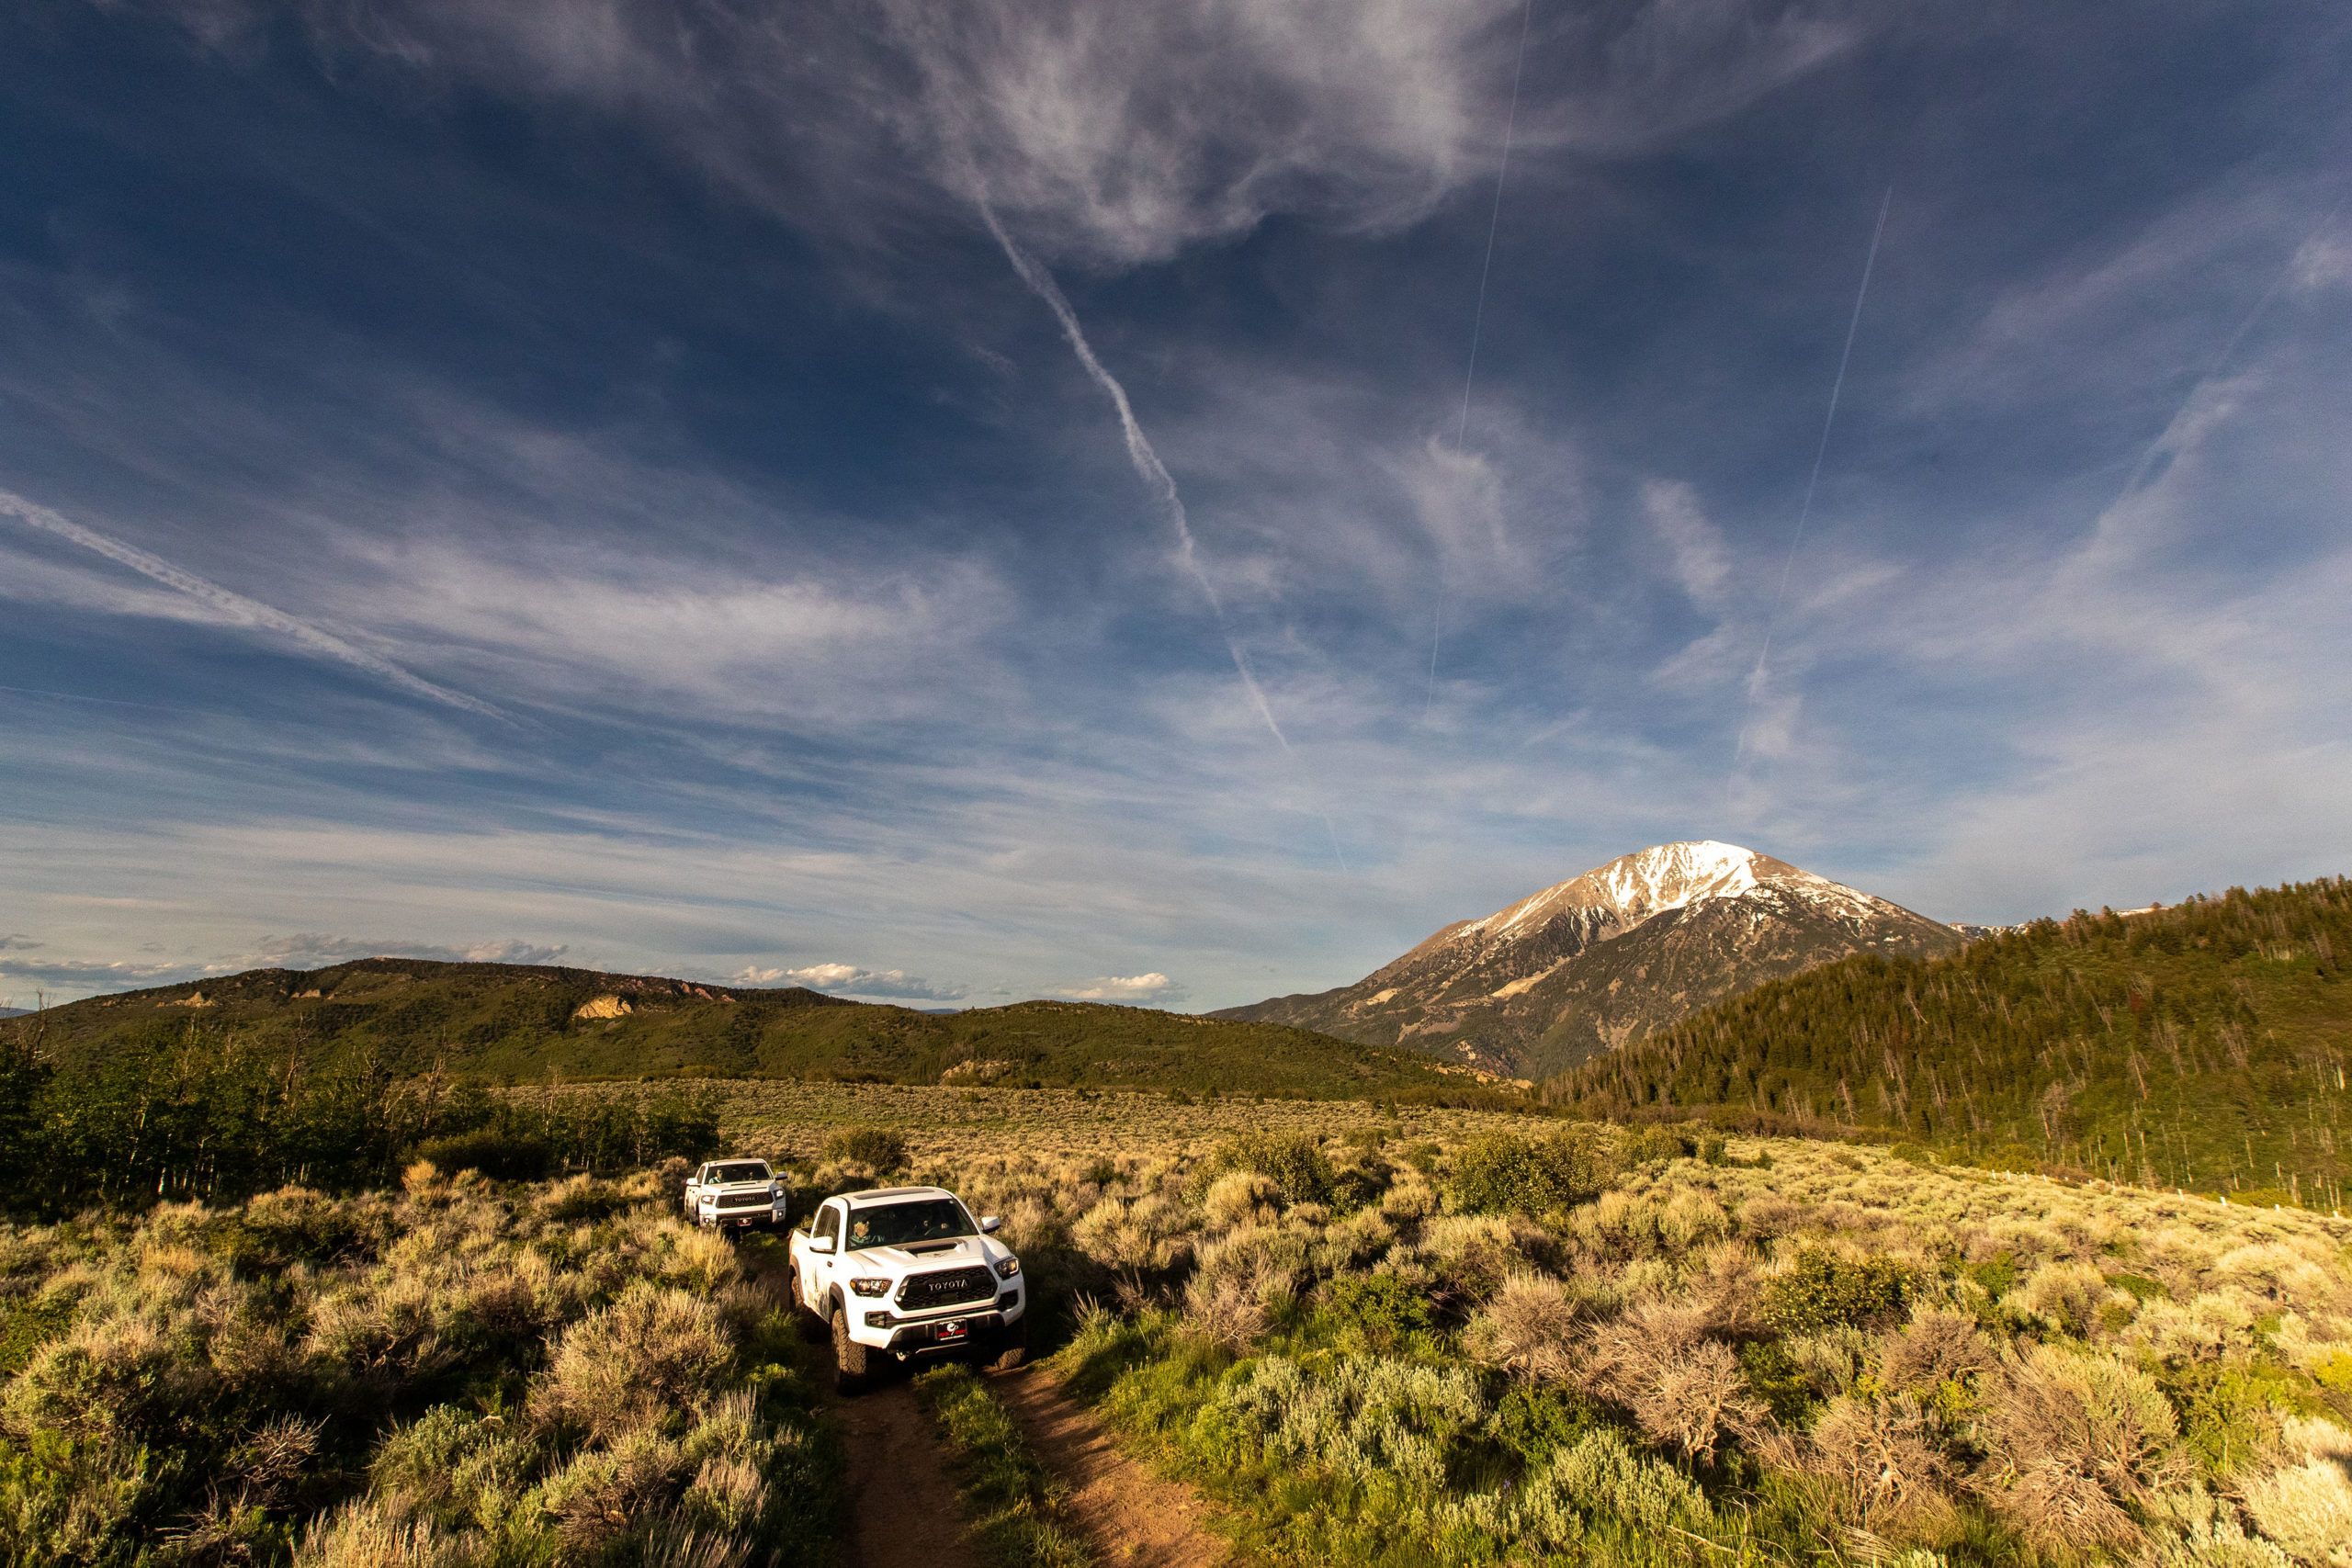 Two vehicles traverse a scenic dirt road winding through the Colorado backcountry, surrounded by sage bush. The picturesque scene exudes solitude, creating an impression that they are the sole adventurers in the vast and beautiful landscape.